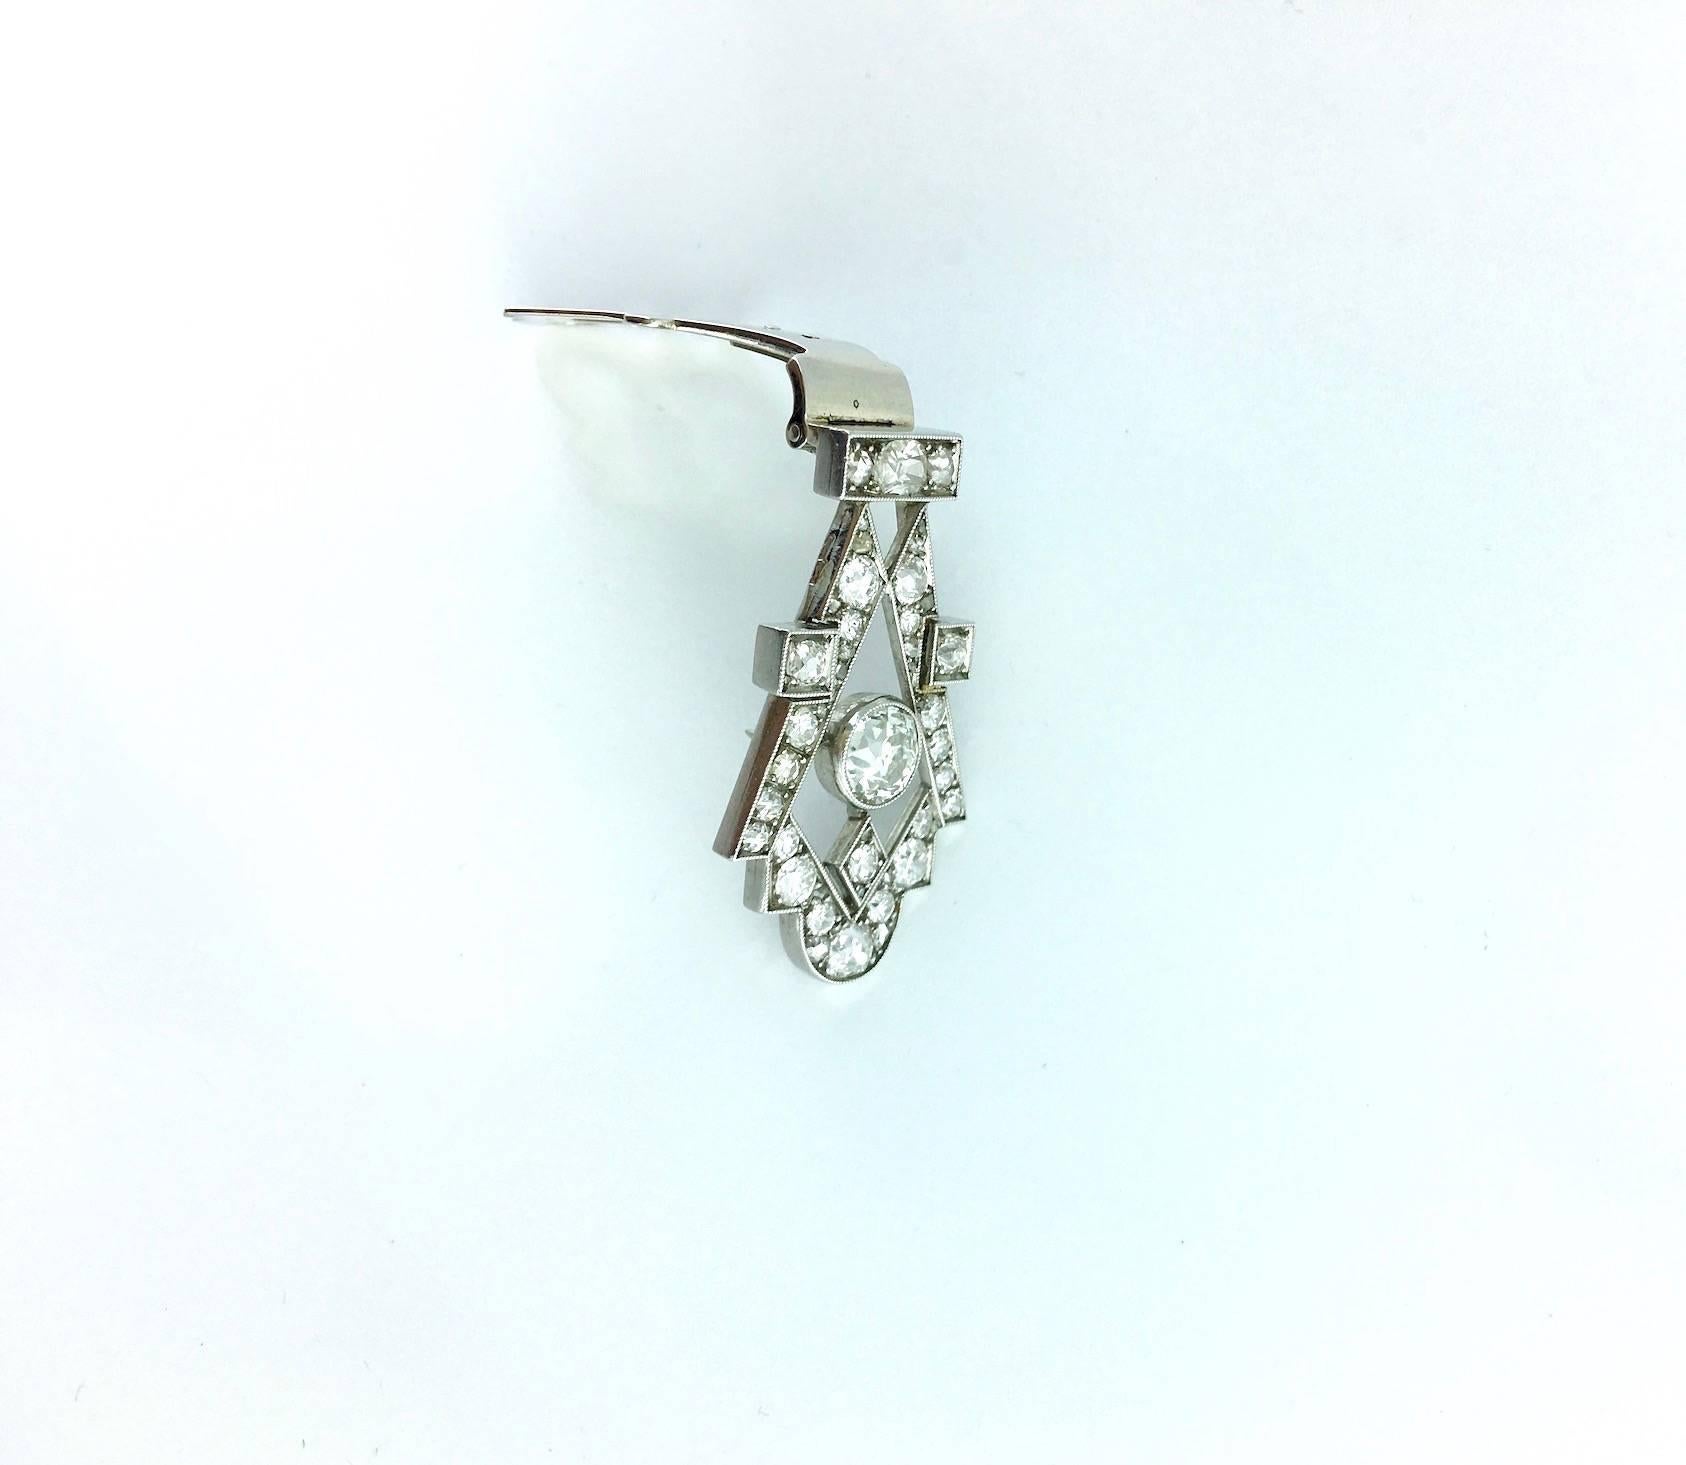 Art Deco's strong design is mesmerizing. This Diamond and Platinum clip is convertible on a post realized cultured pearl necklace.
Russian marks 585 14k white gold for the system.
The clip brooch is circa 1930.

Gross weight: 9.69 grams